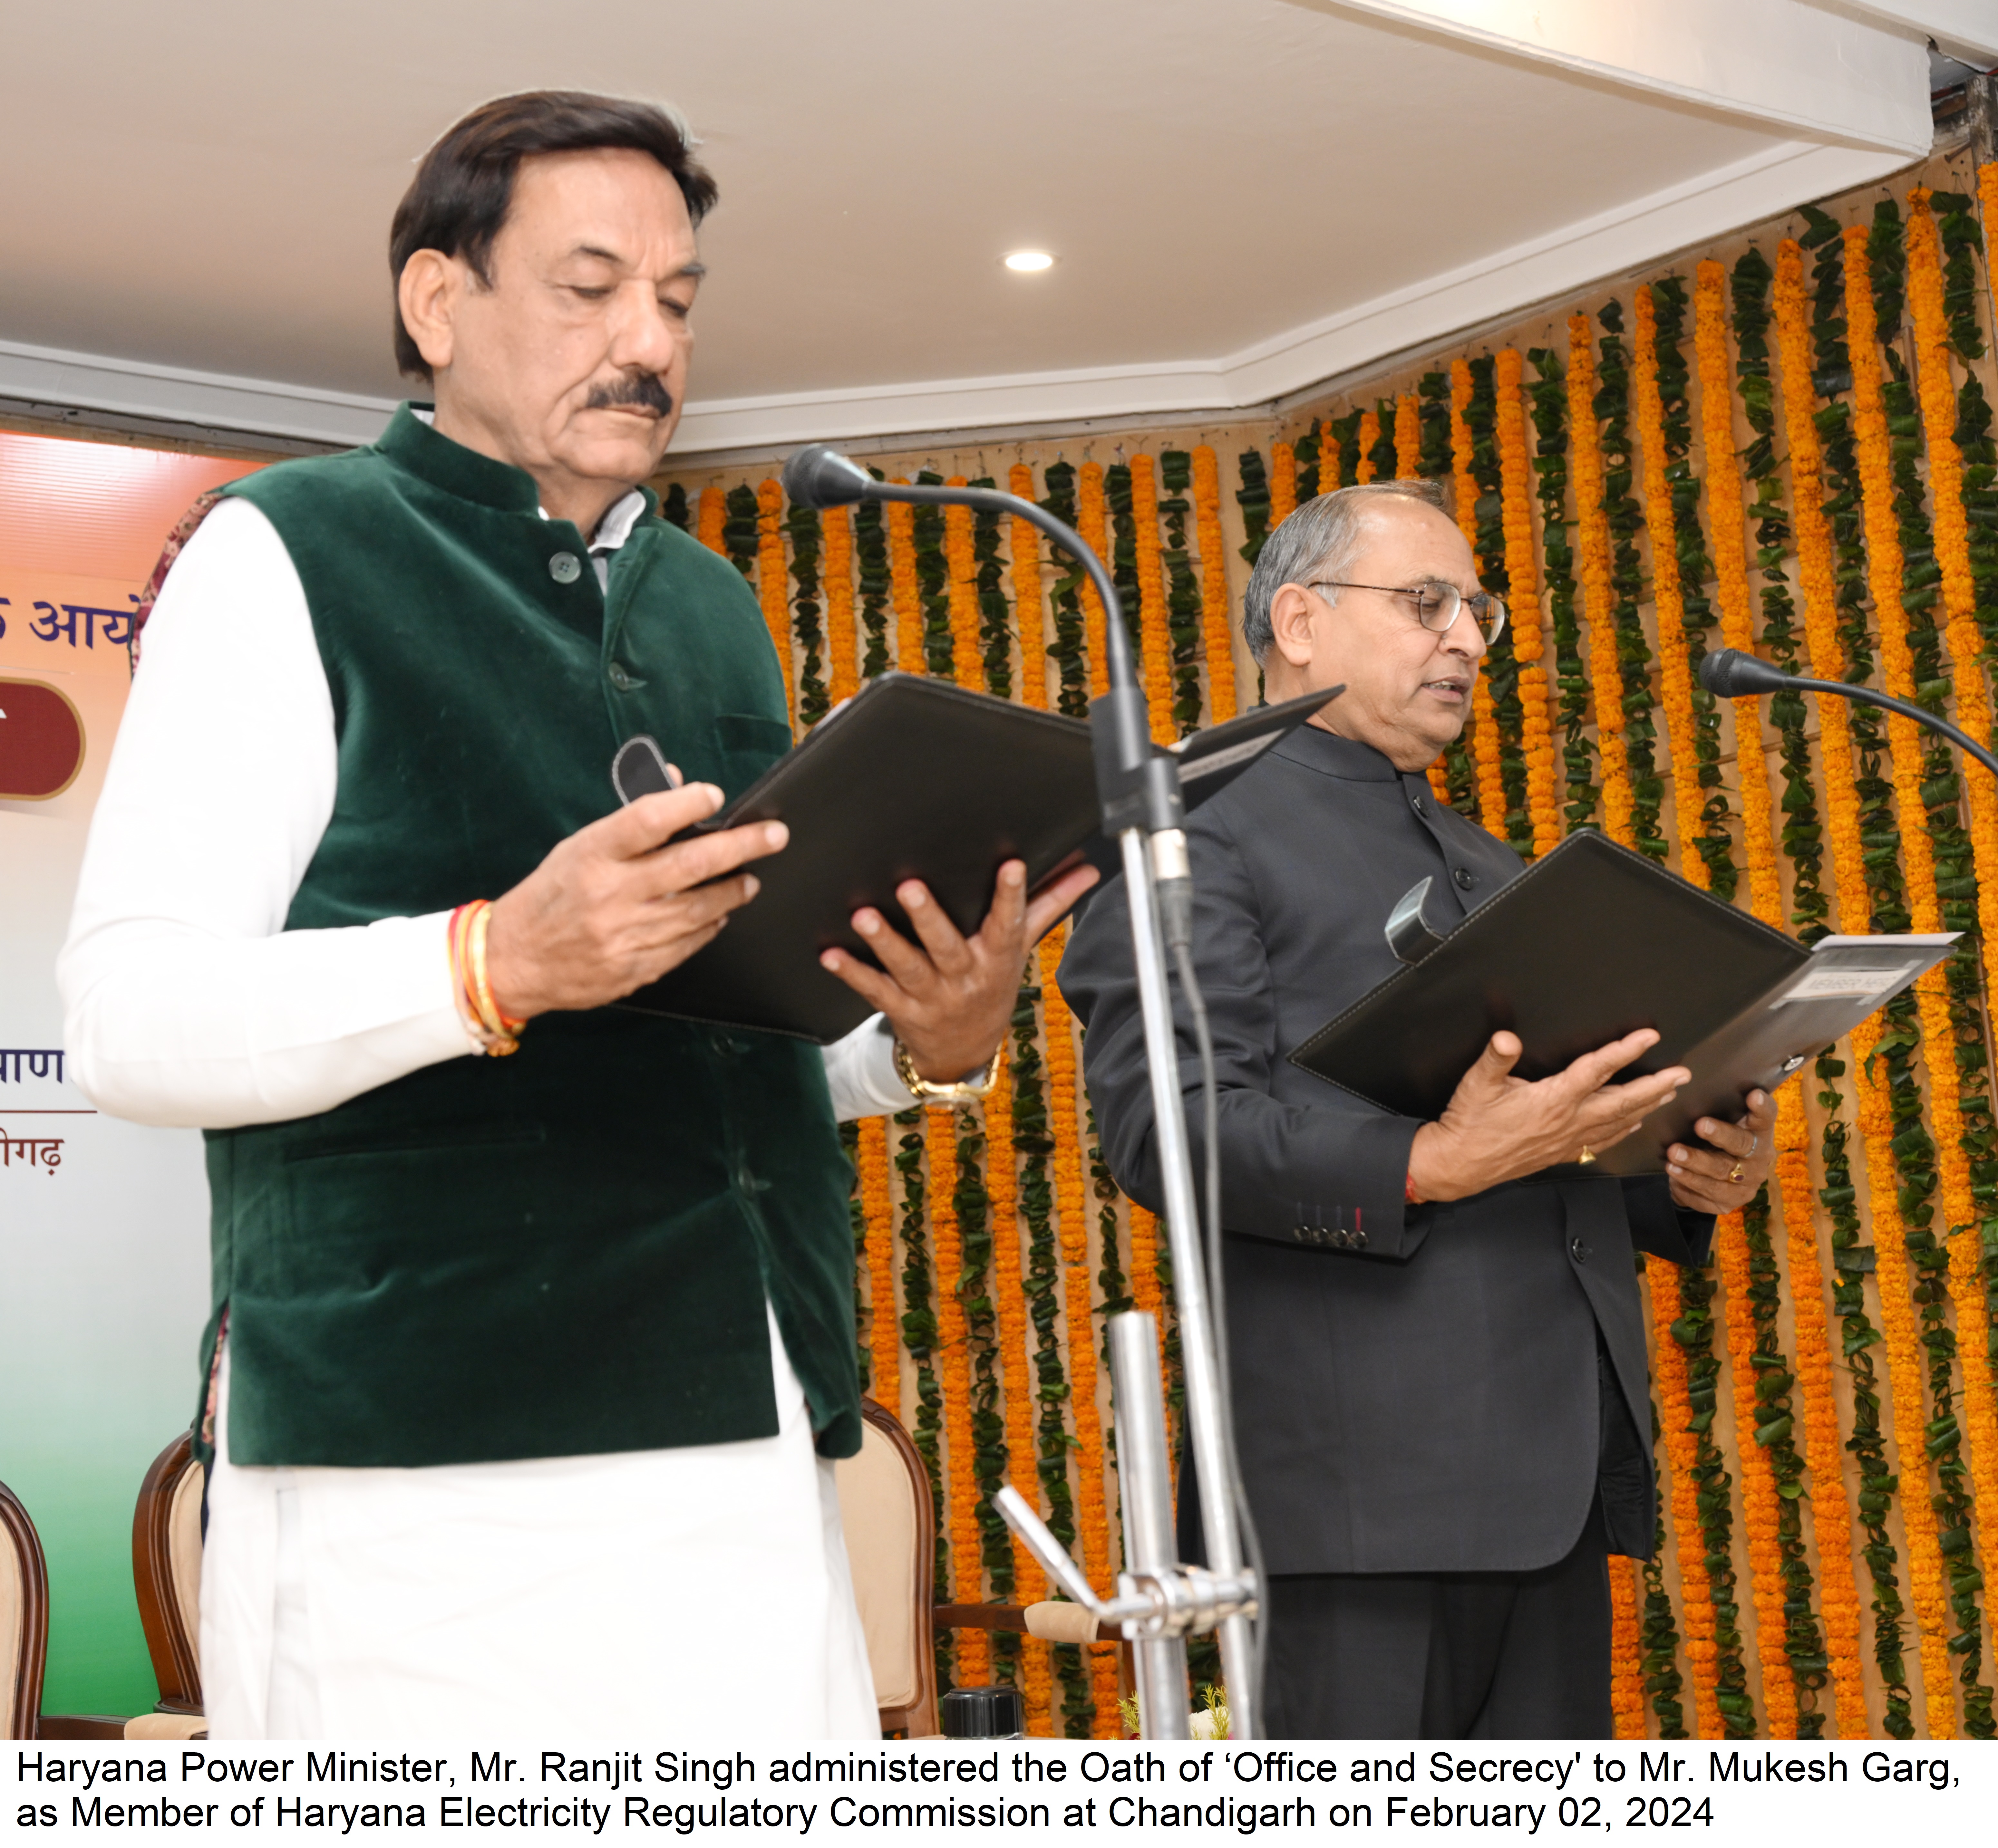 Haryana Power Minister, Mr. Ranjit Singh administered the Oath of ‘Office and Secrecy' to Mr. Mukesh Garg, as Member of Haryana Electricity Regulatory Commission at Chandigarh on February 02, 2024